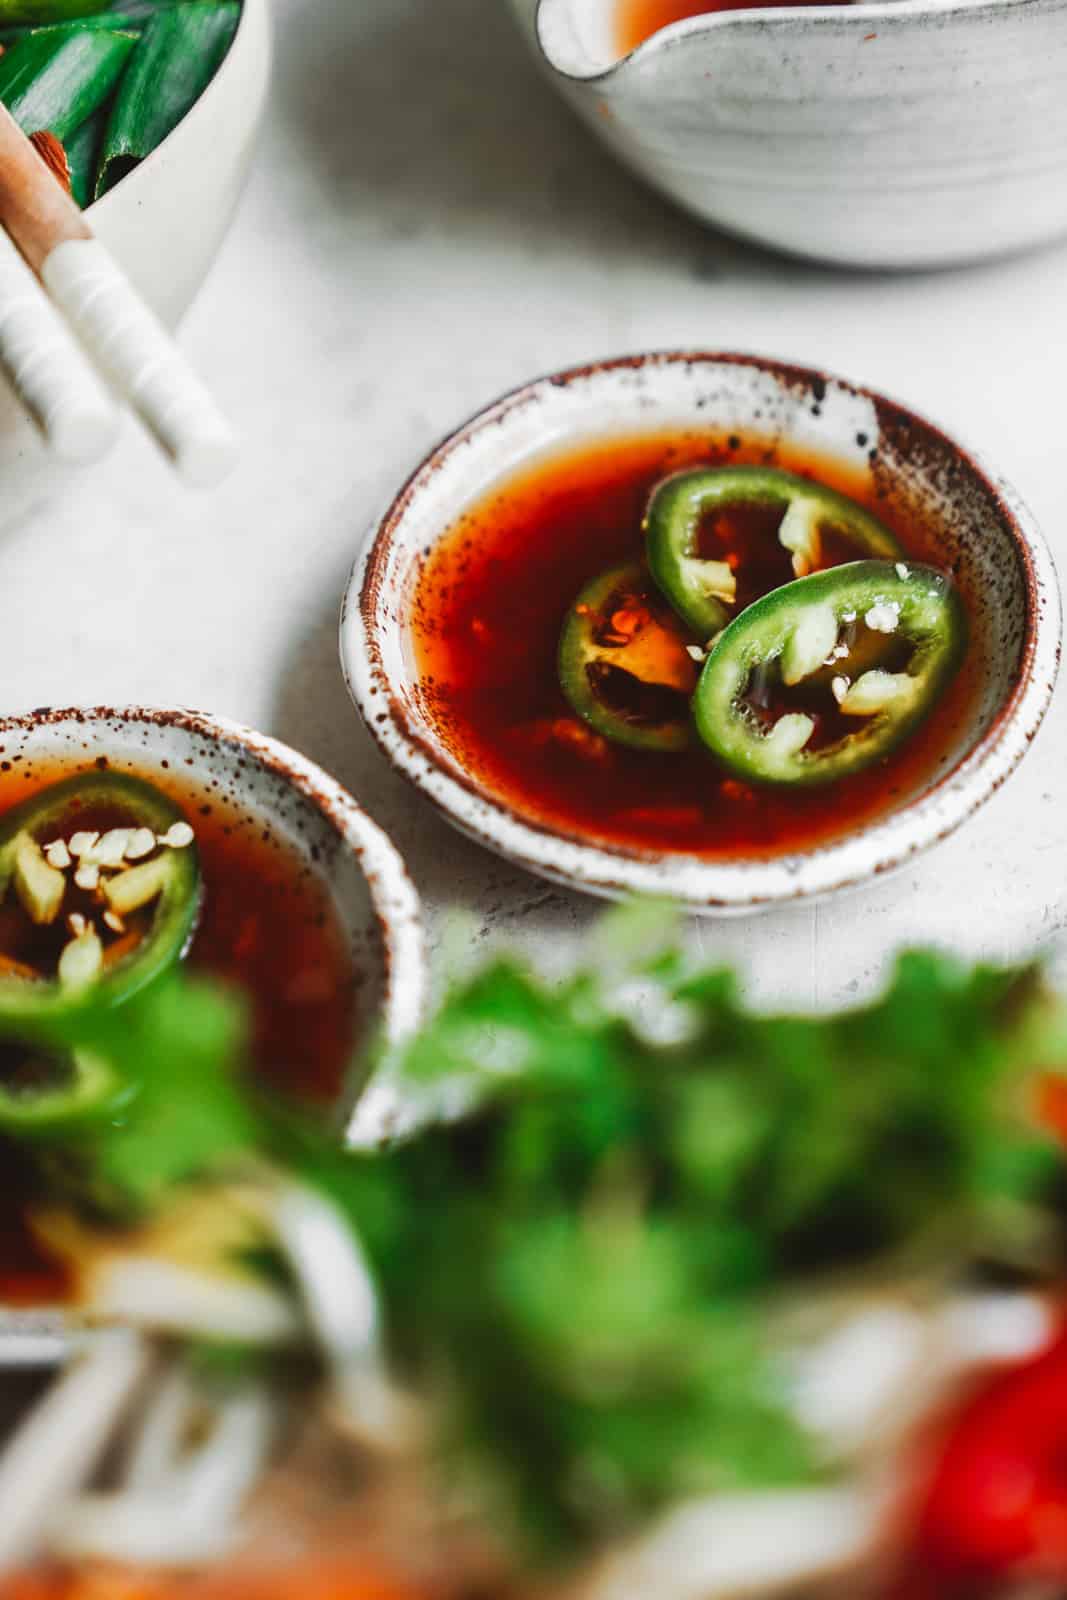 Fish sauce substitute in small bowls